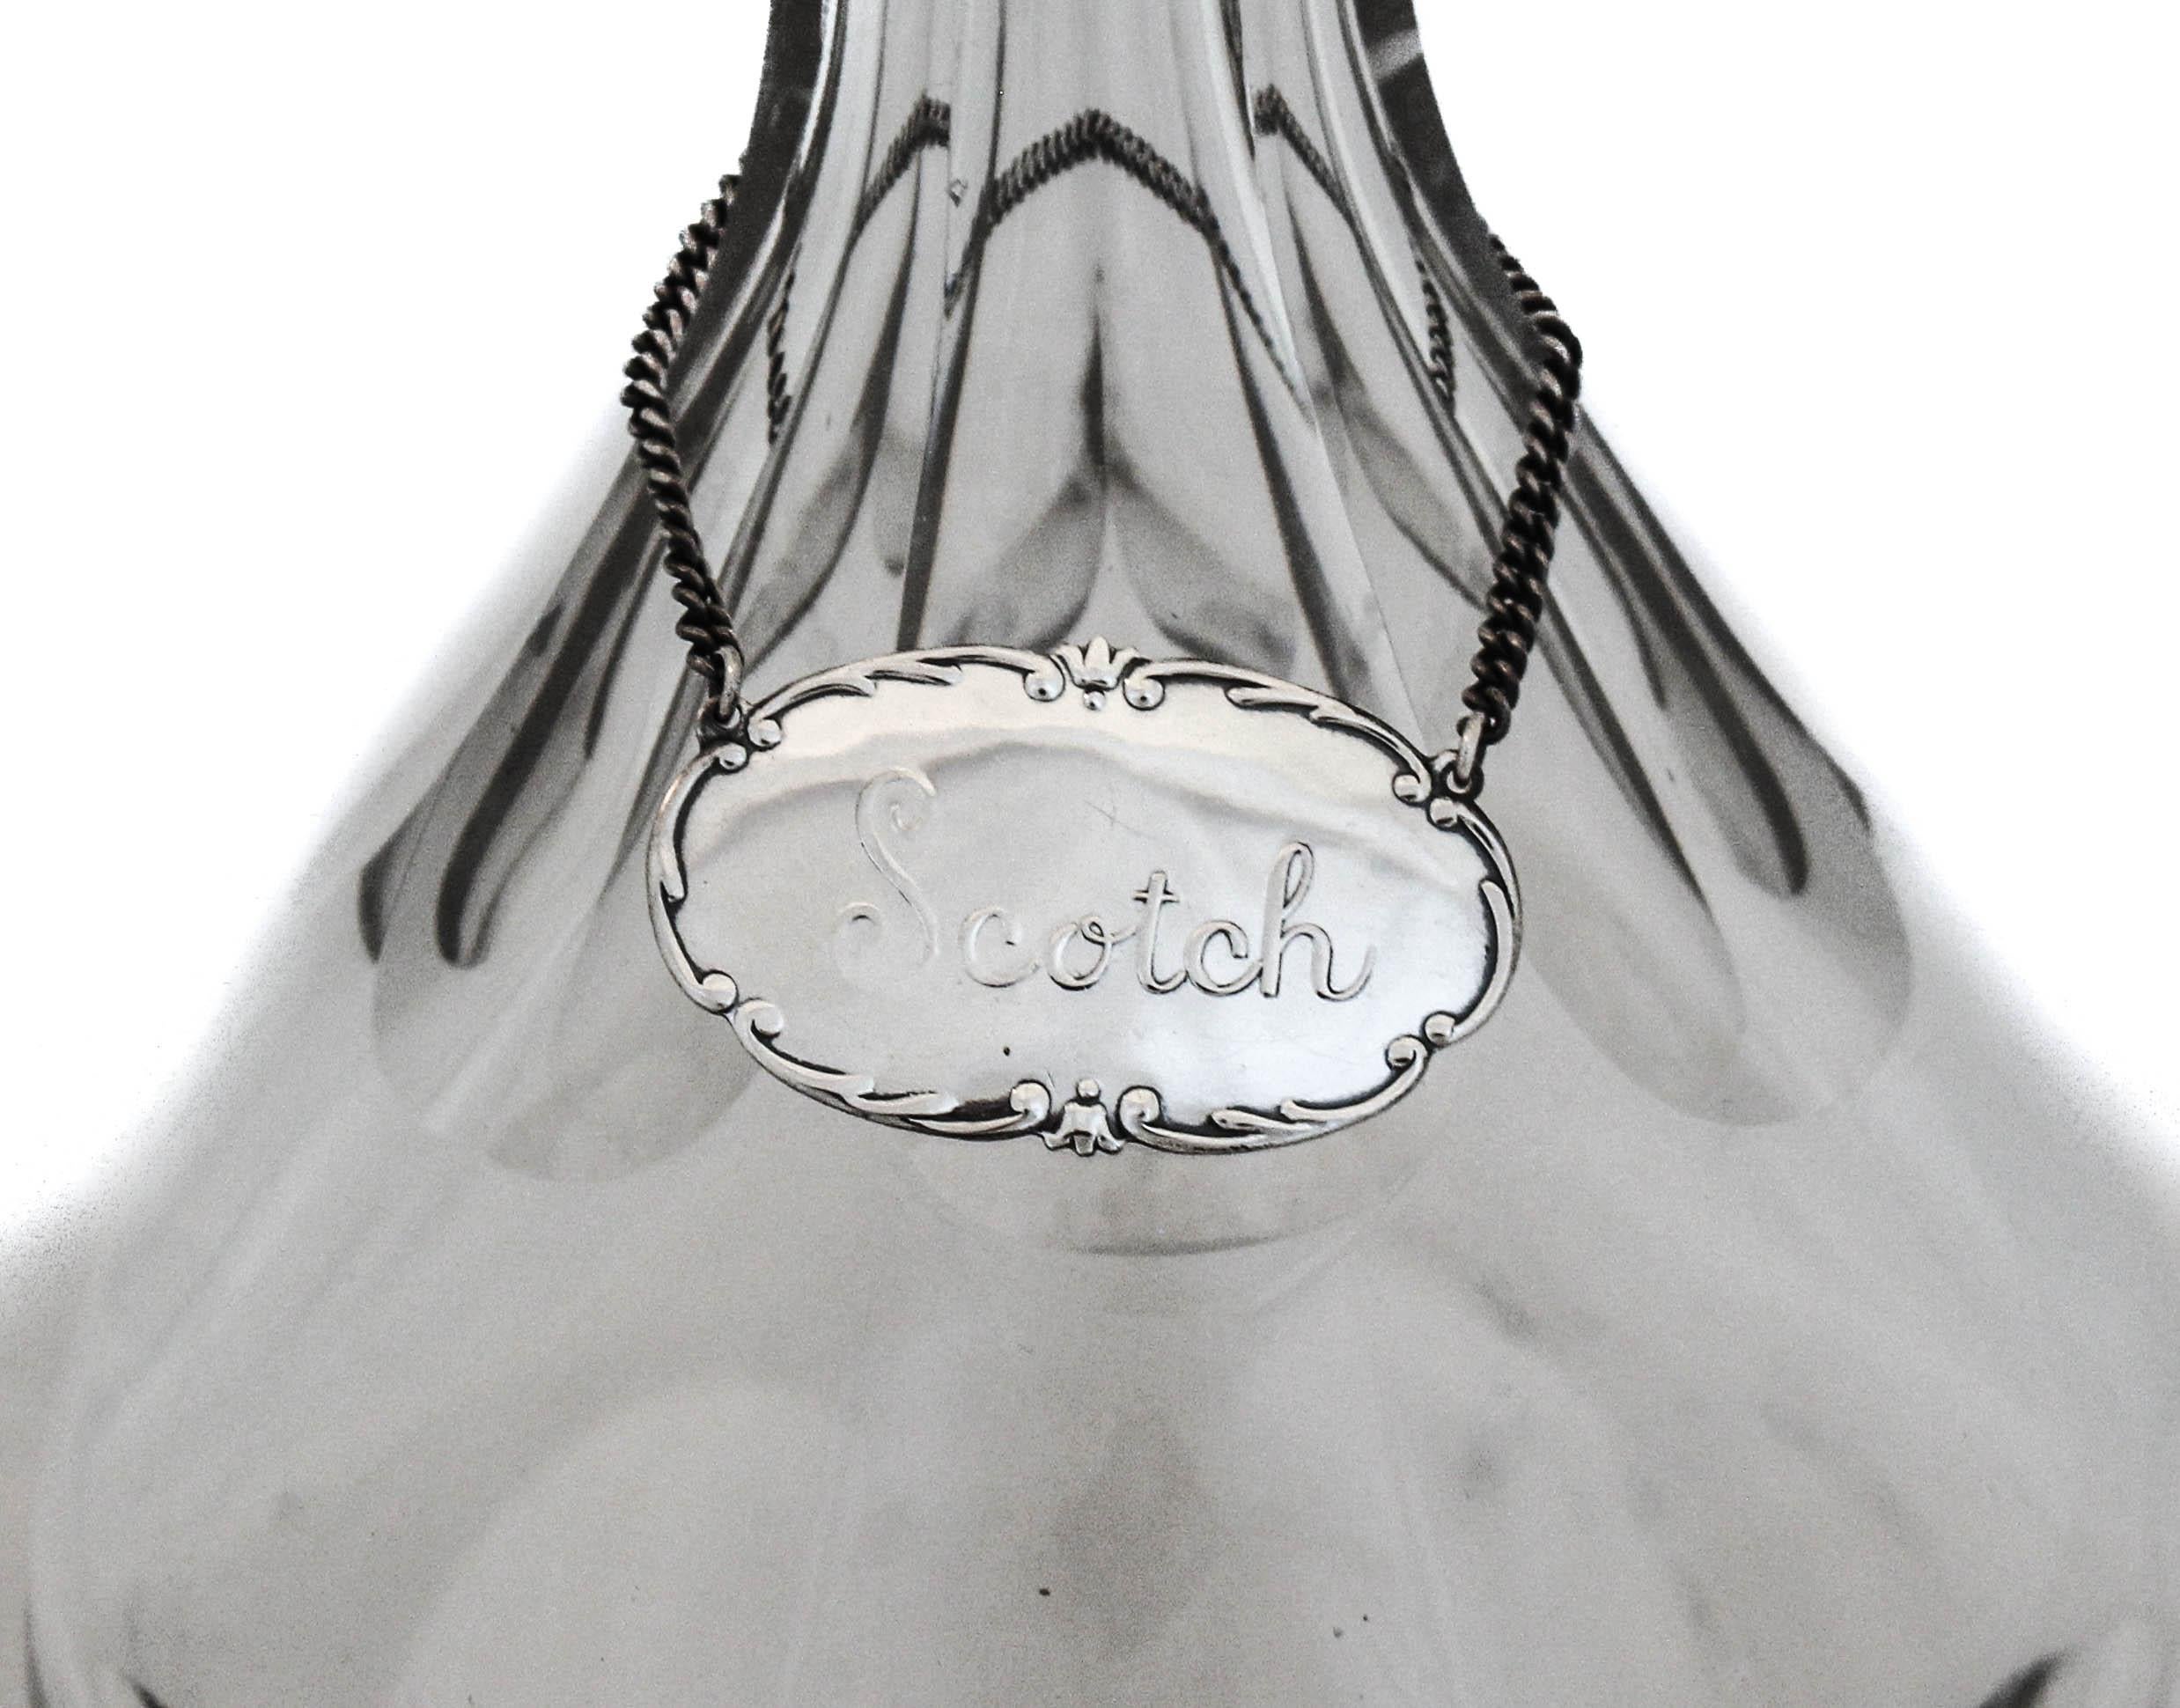 This liquor label is crafted of sterling silver, with the word 